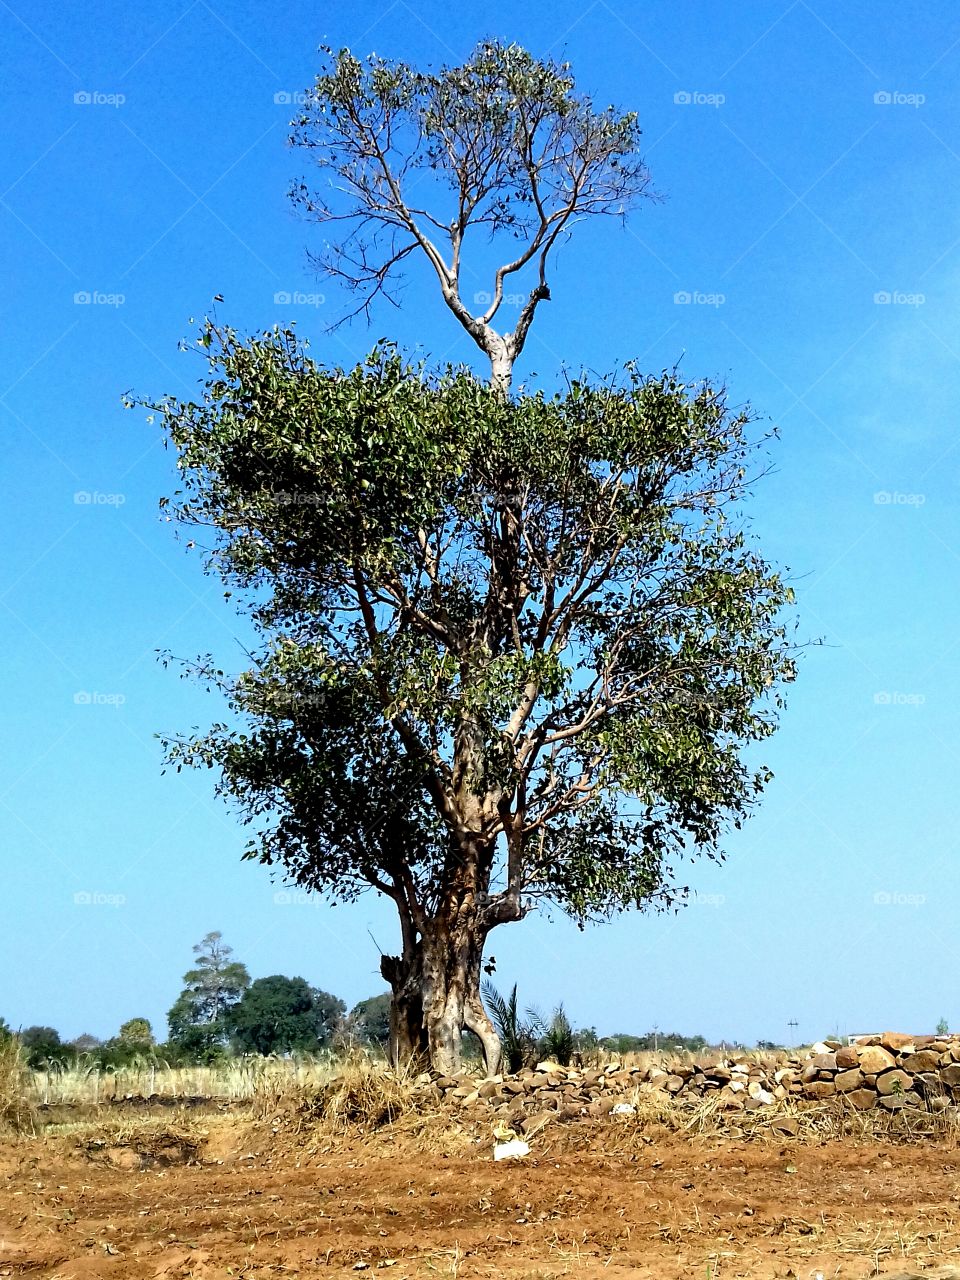 View of a tree in field